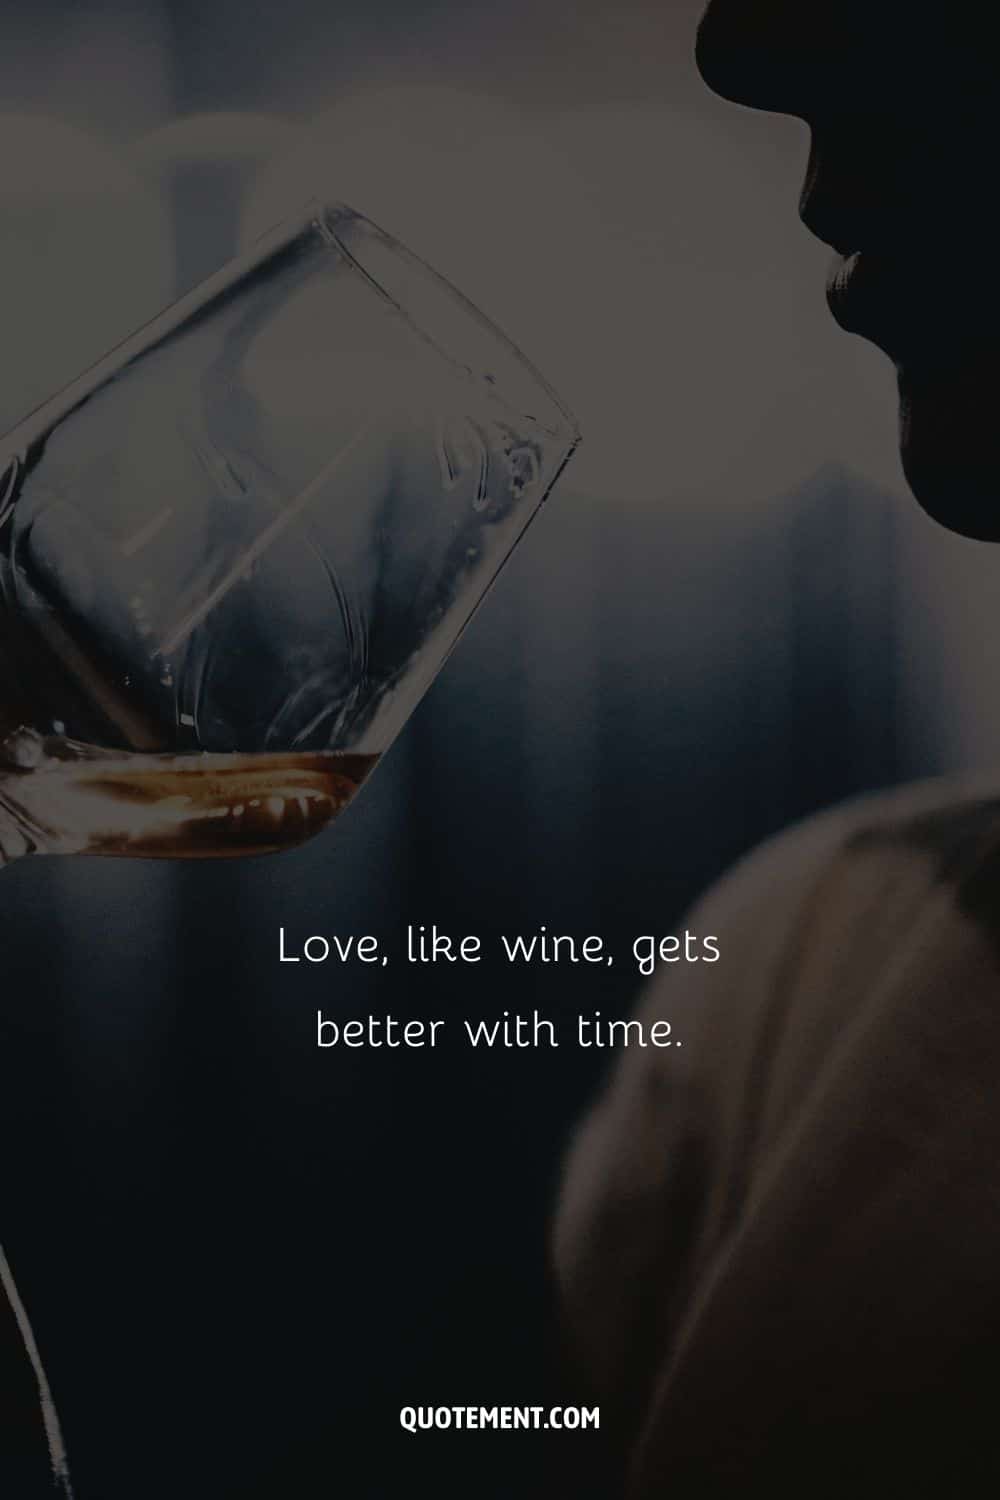 Love, like wine, gets better with time